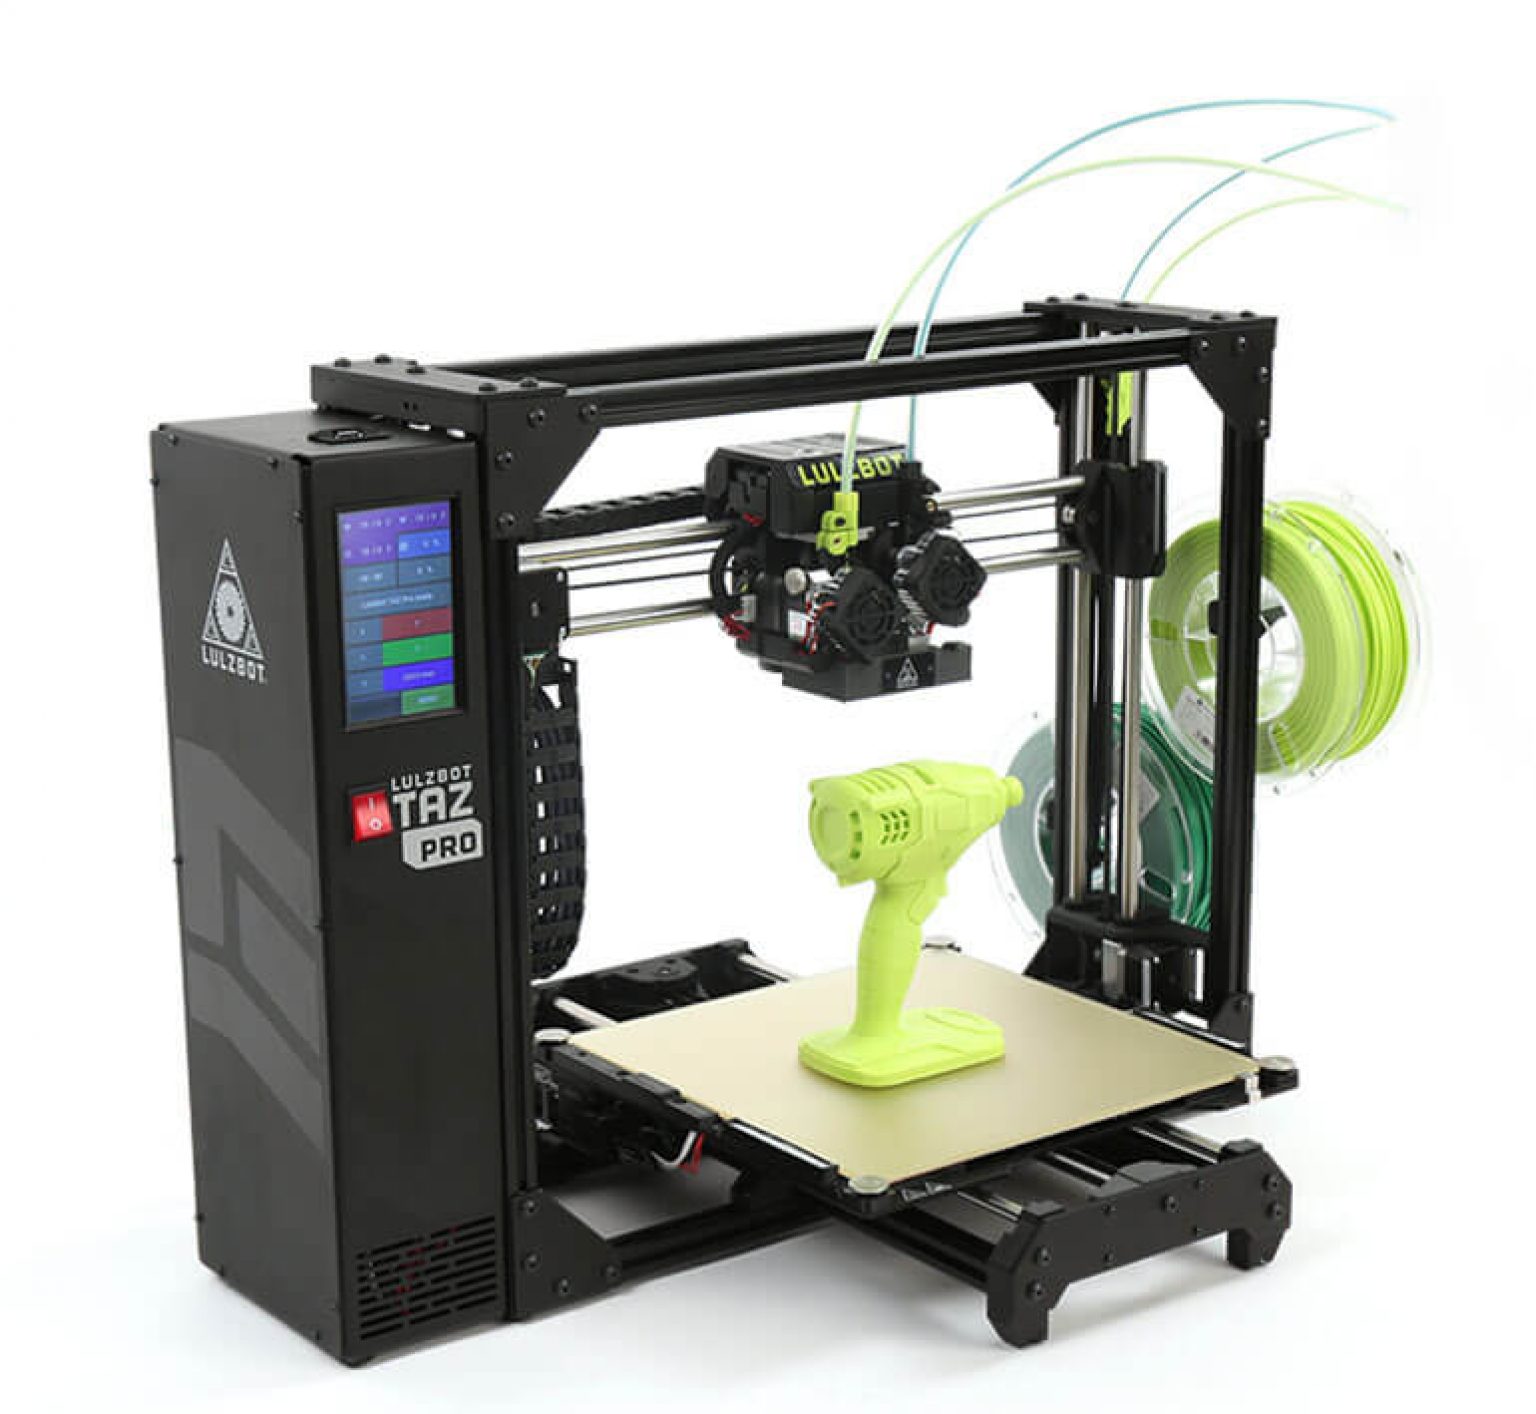 15 Best Professional 3D Printers The Ultimate Buyer's Guide Pick 3D